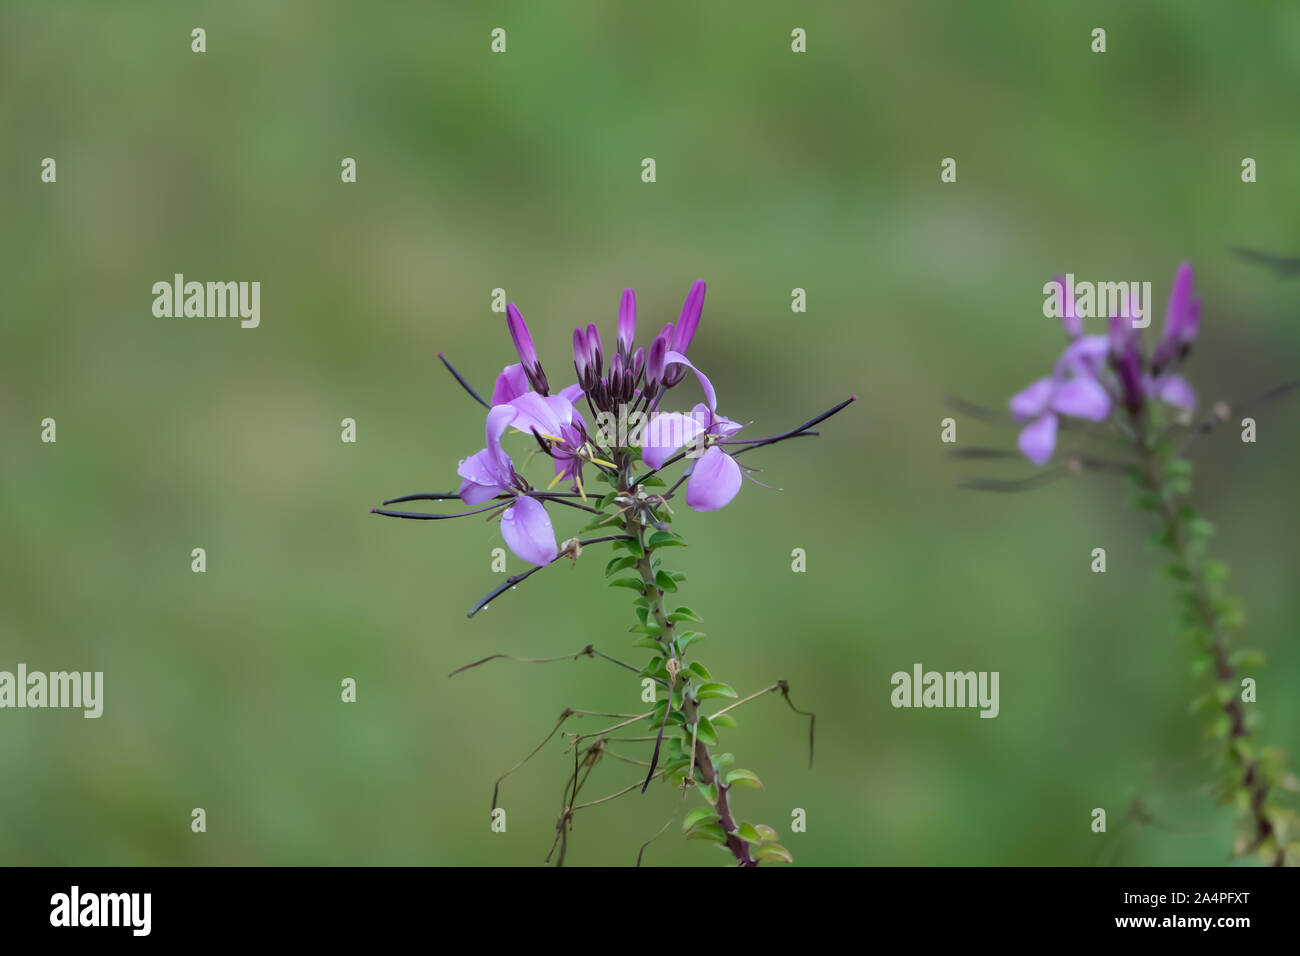 Purple Cleome Flowers In Bloom Stock Photo Alamy